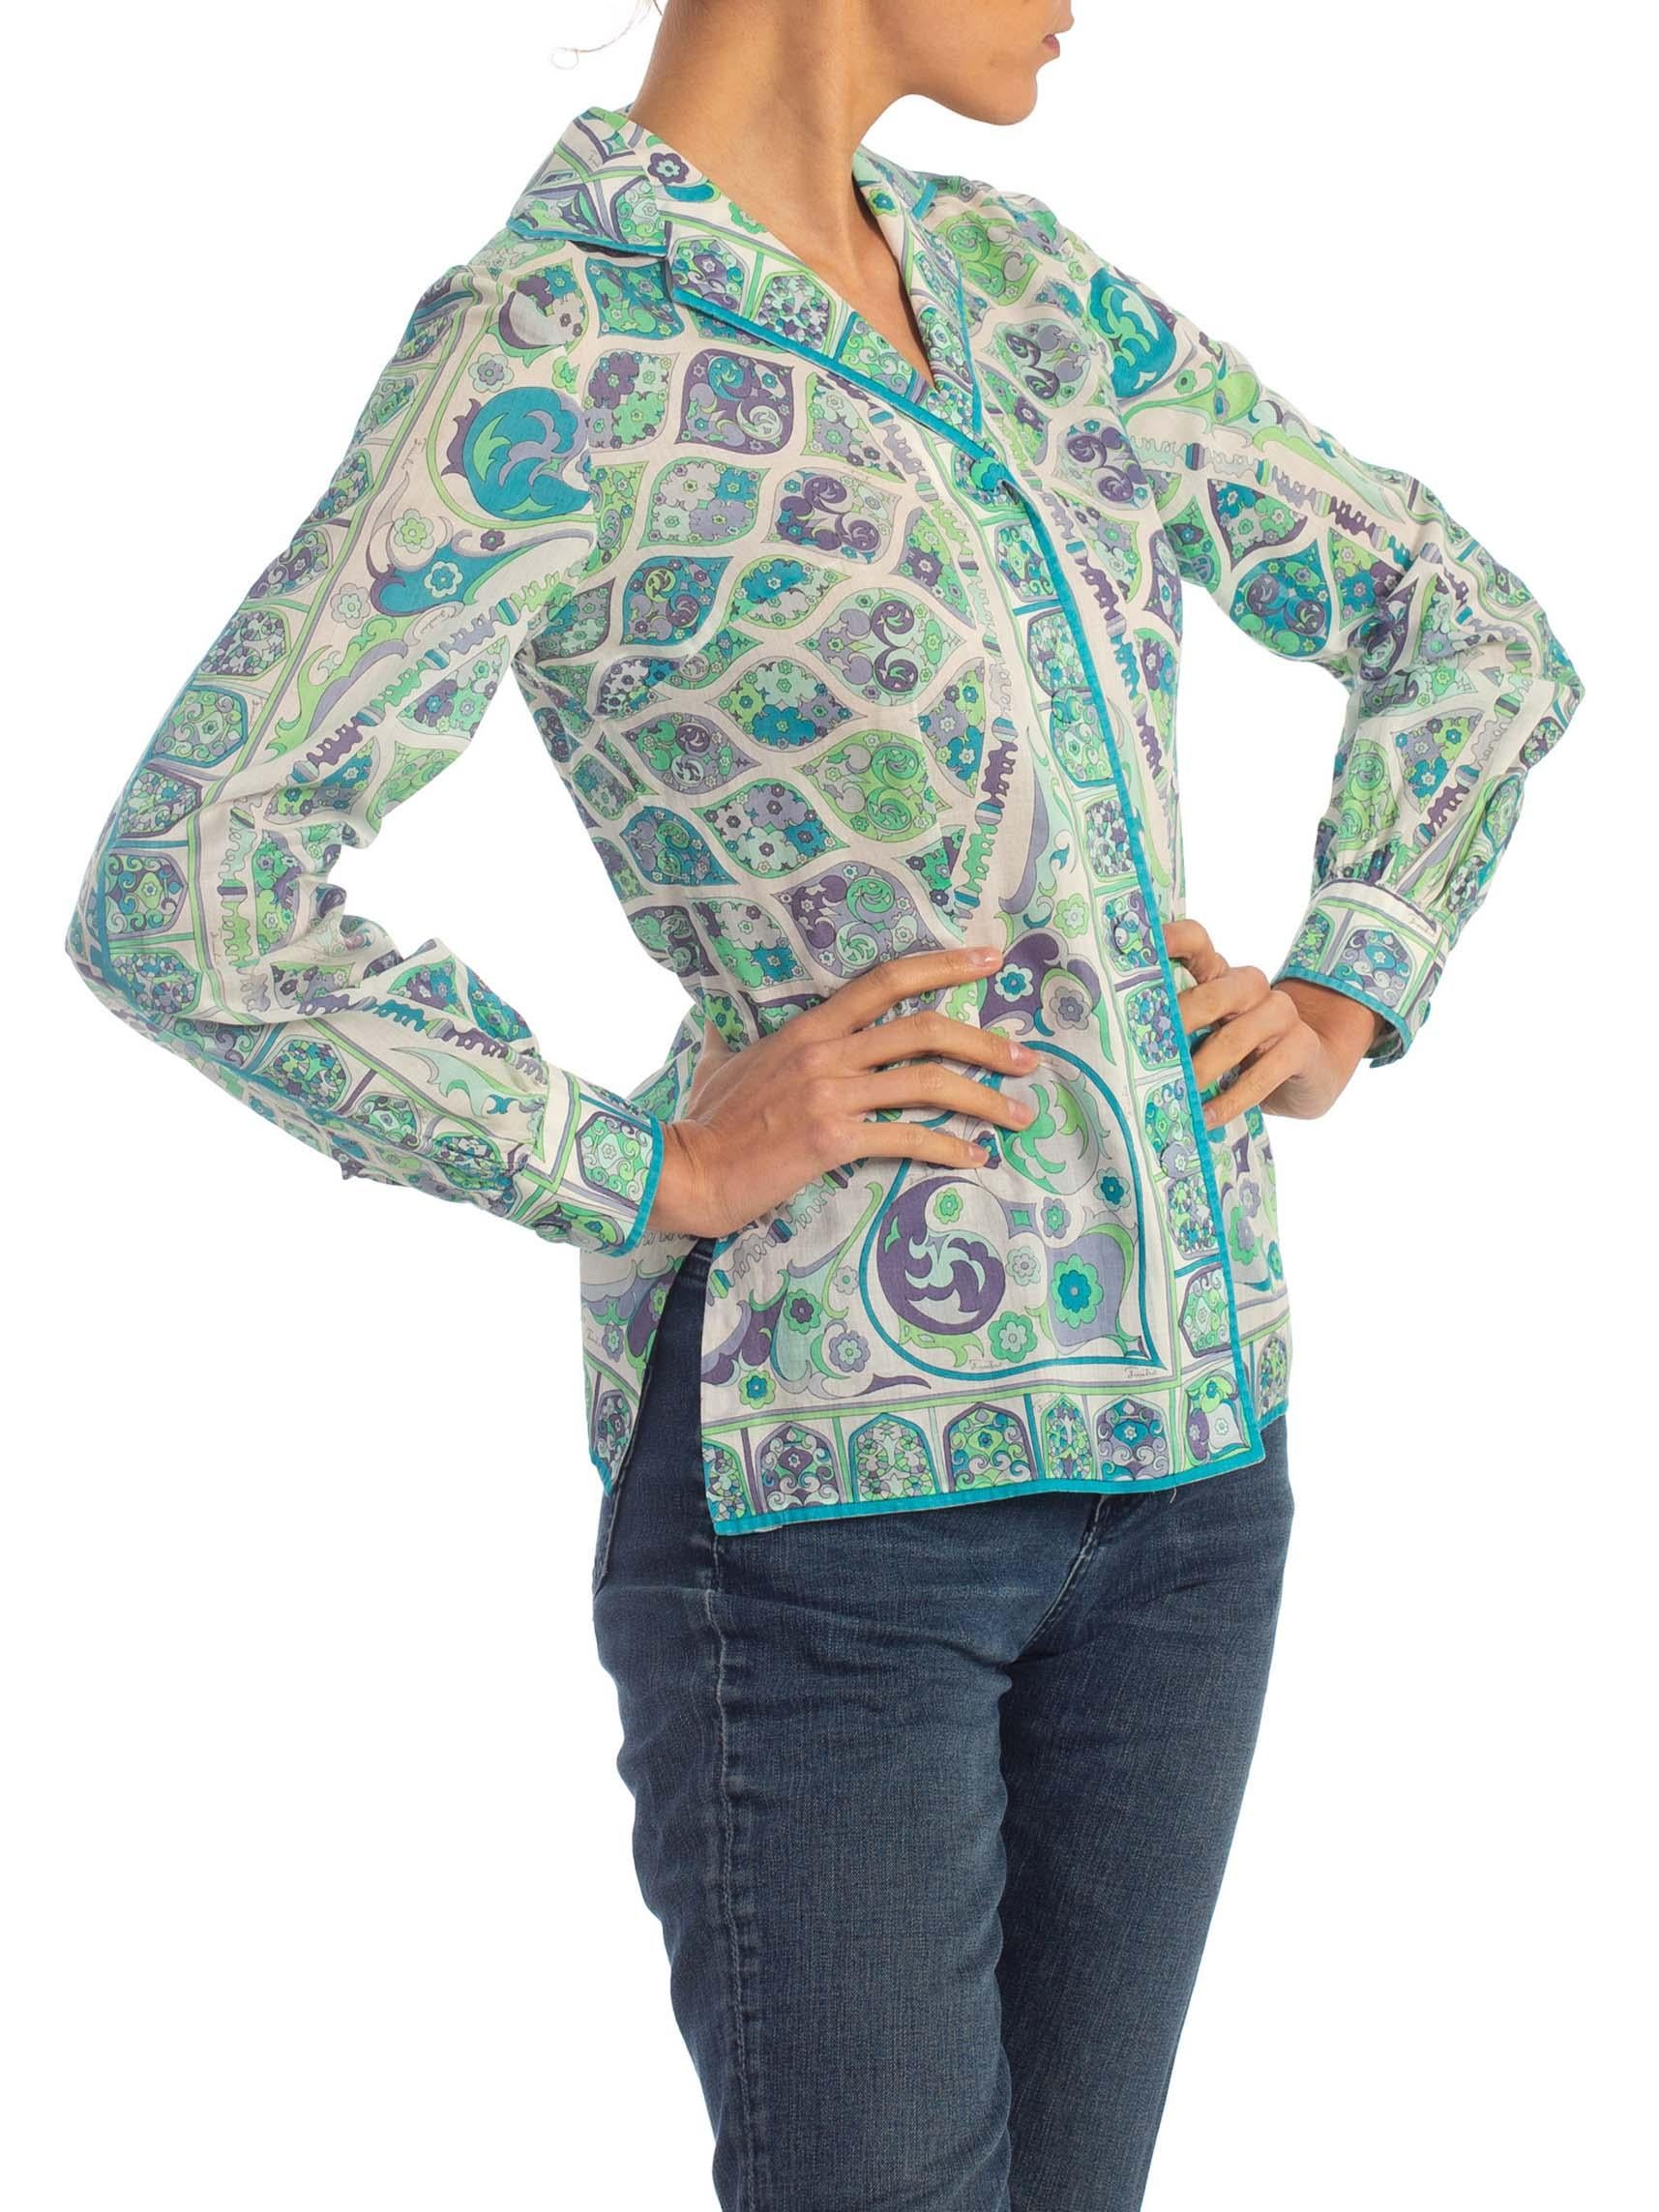 Women's 1960'S SAKS FIFTH AVE ITALY EXCLUSIVE EMILIO PUCCI Pyschedelic Printed Cotton V For Sale